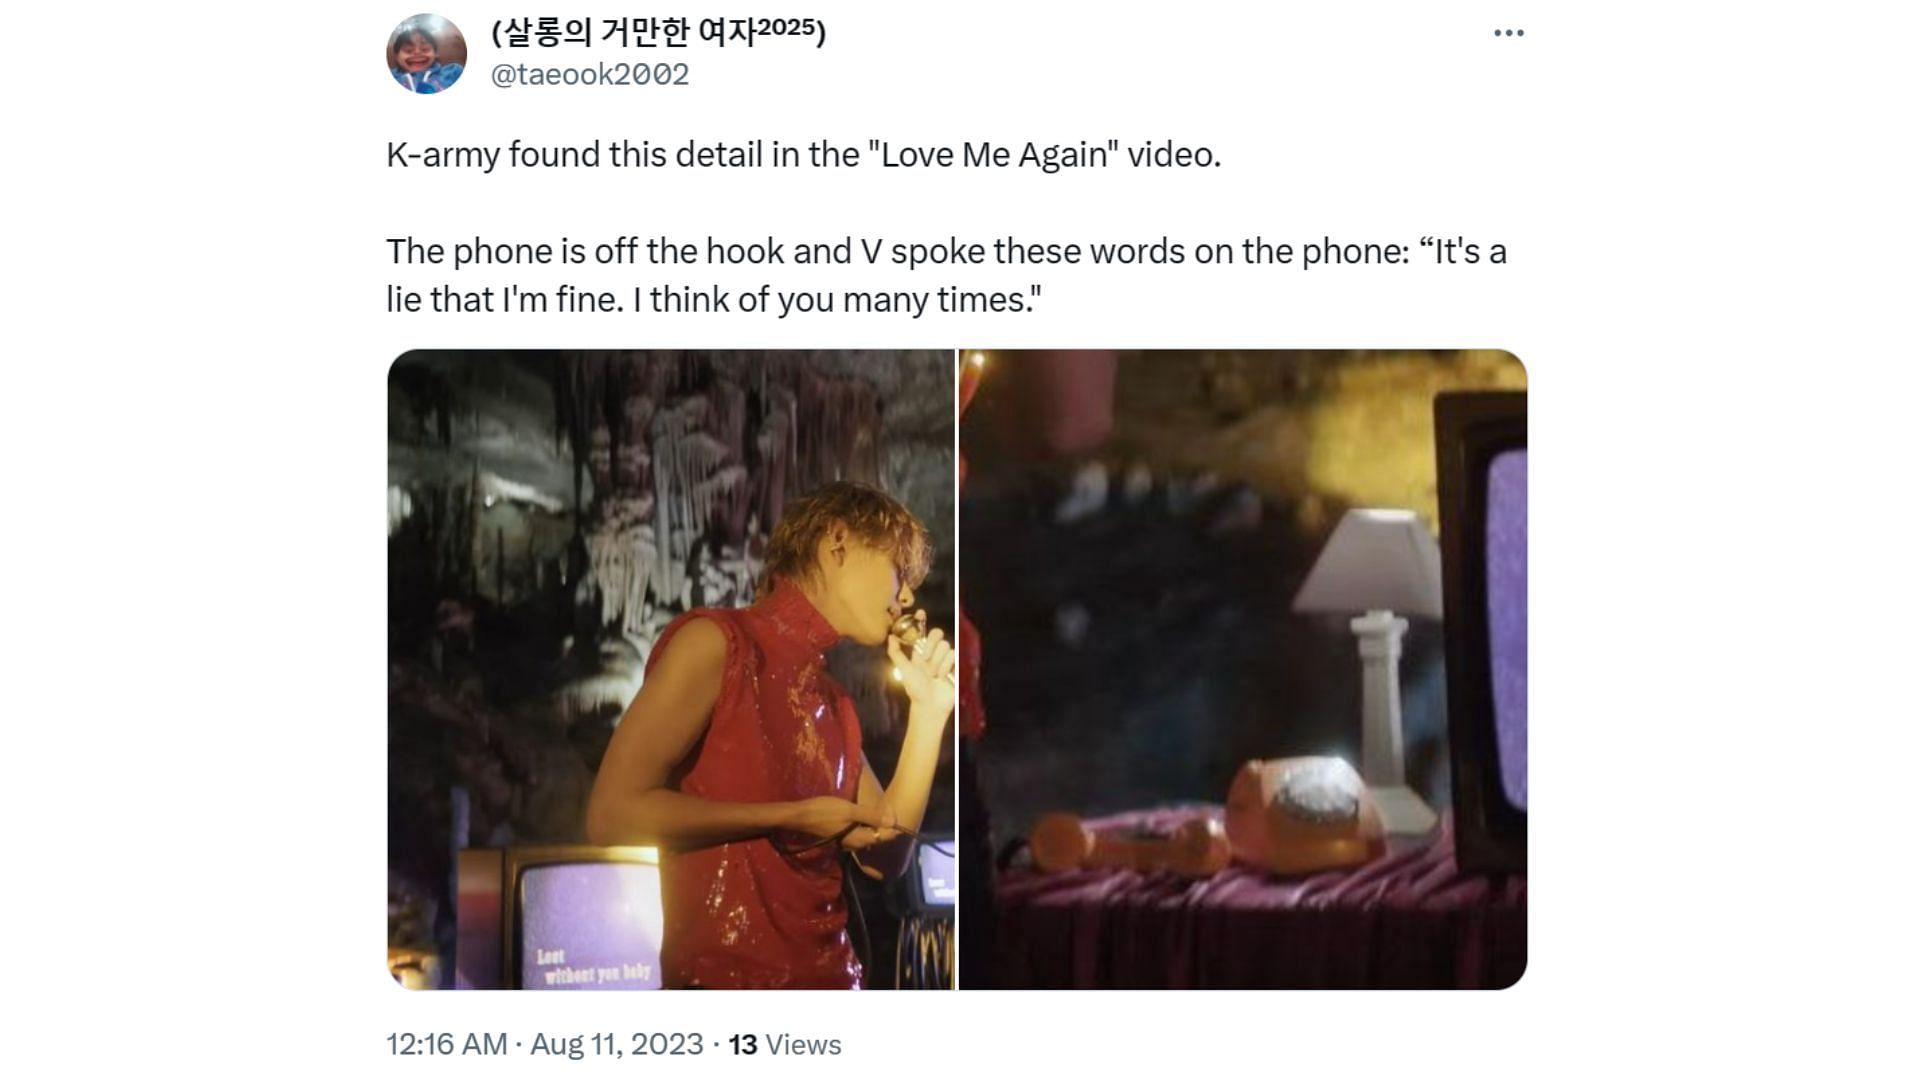 BTS&#039; Kim Tae-hyung tries to reach his SO in the music video. (Image via Twitter/ @taeook2002)